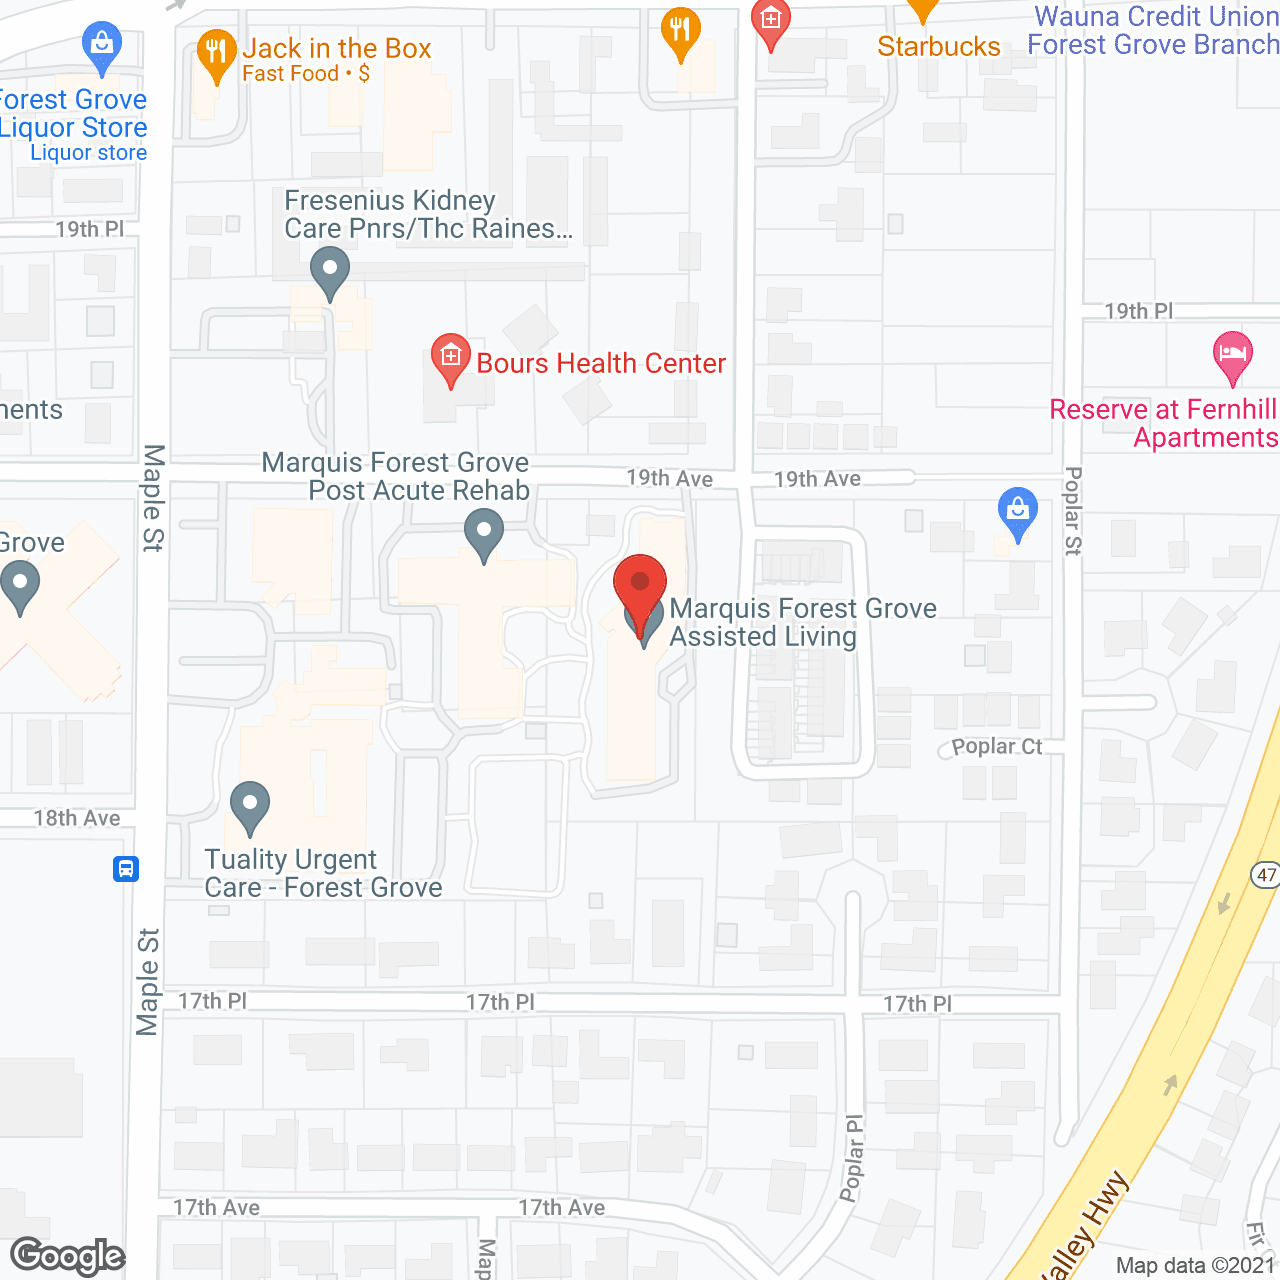 Marquis Forest Grove Assisted Living in google map